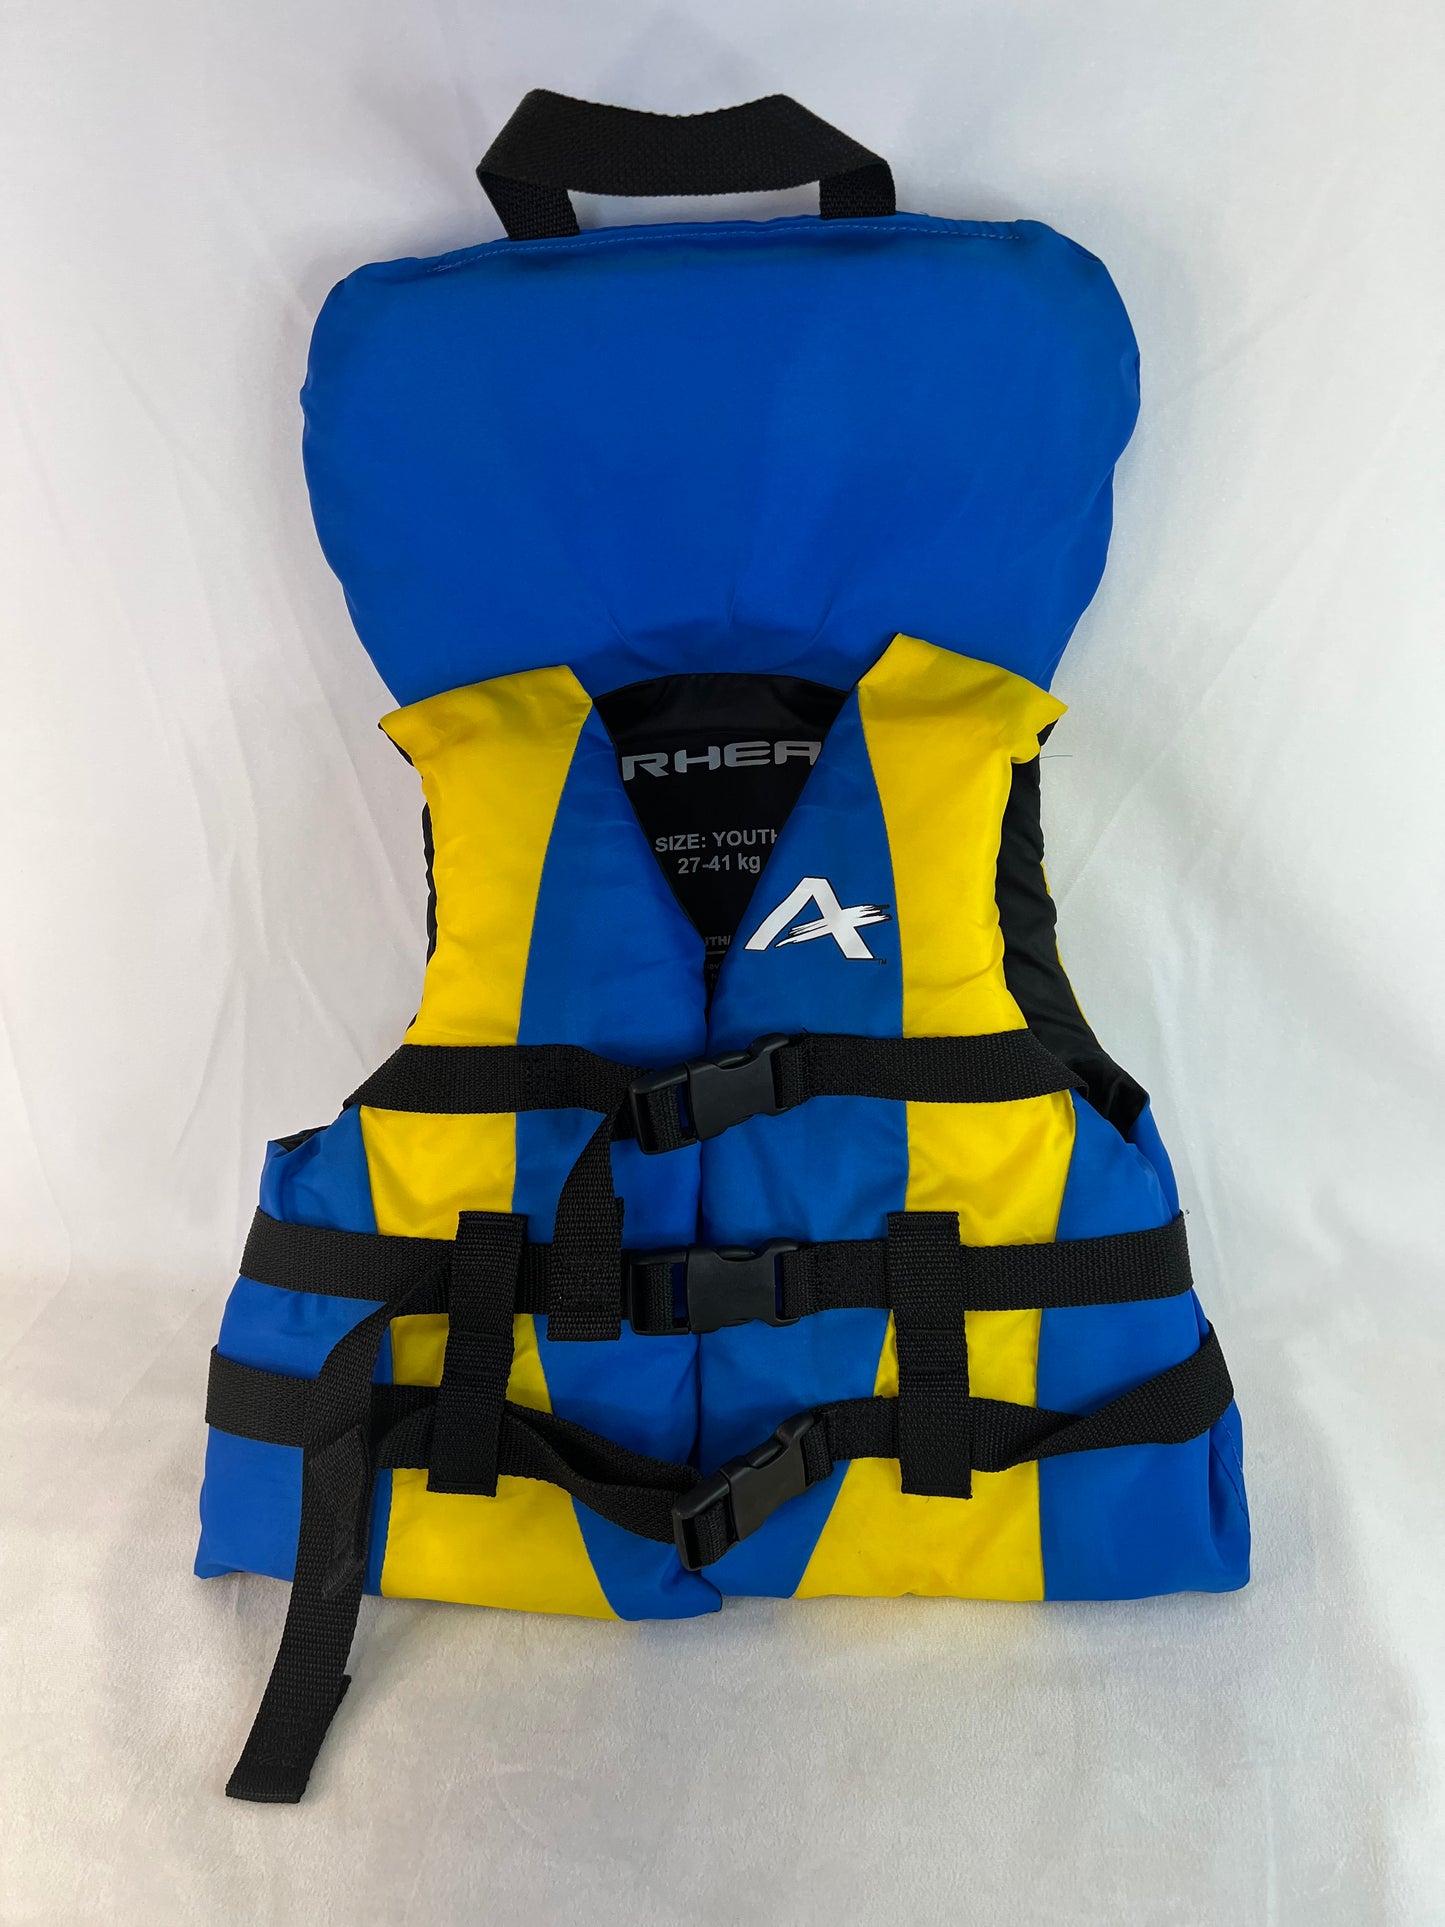 Life Jacket Child Size 60-90 Lb Youth AirHead Blue Red Excellent